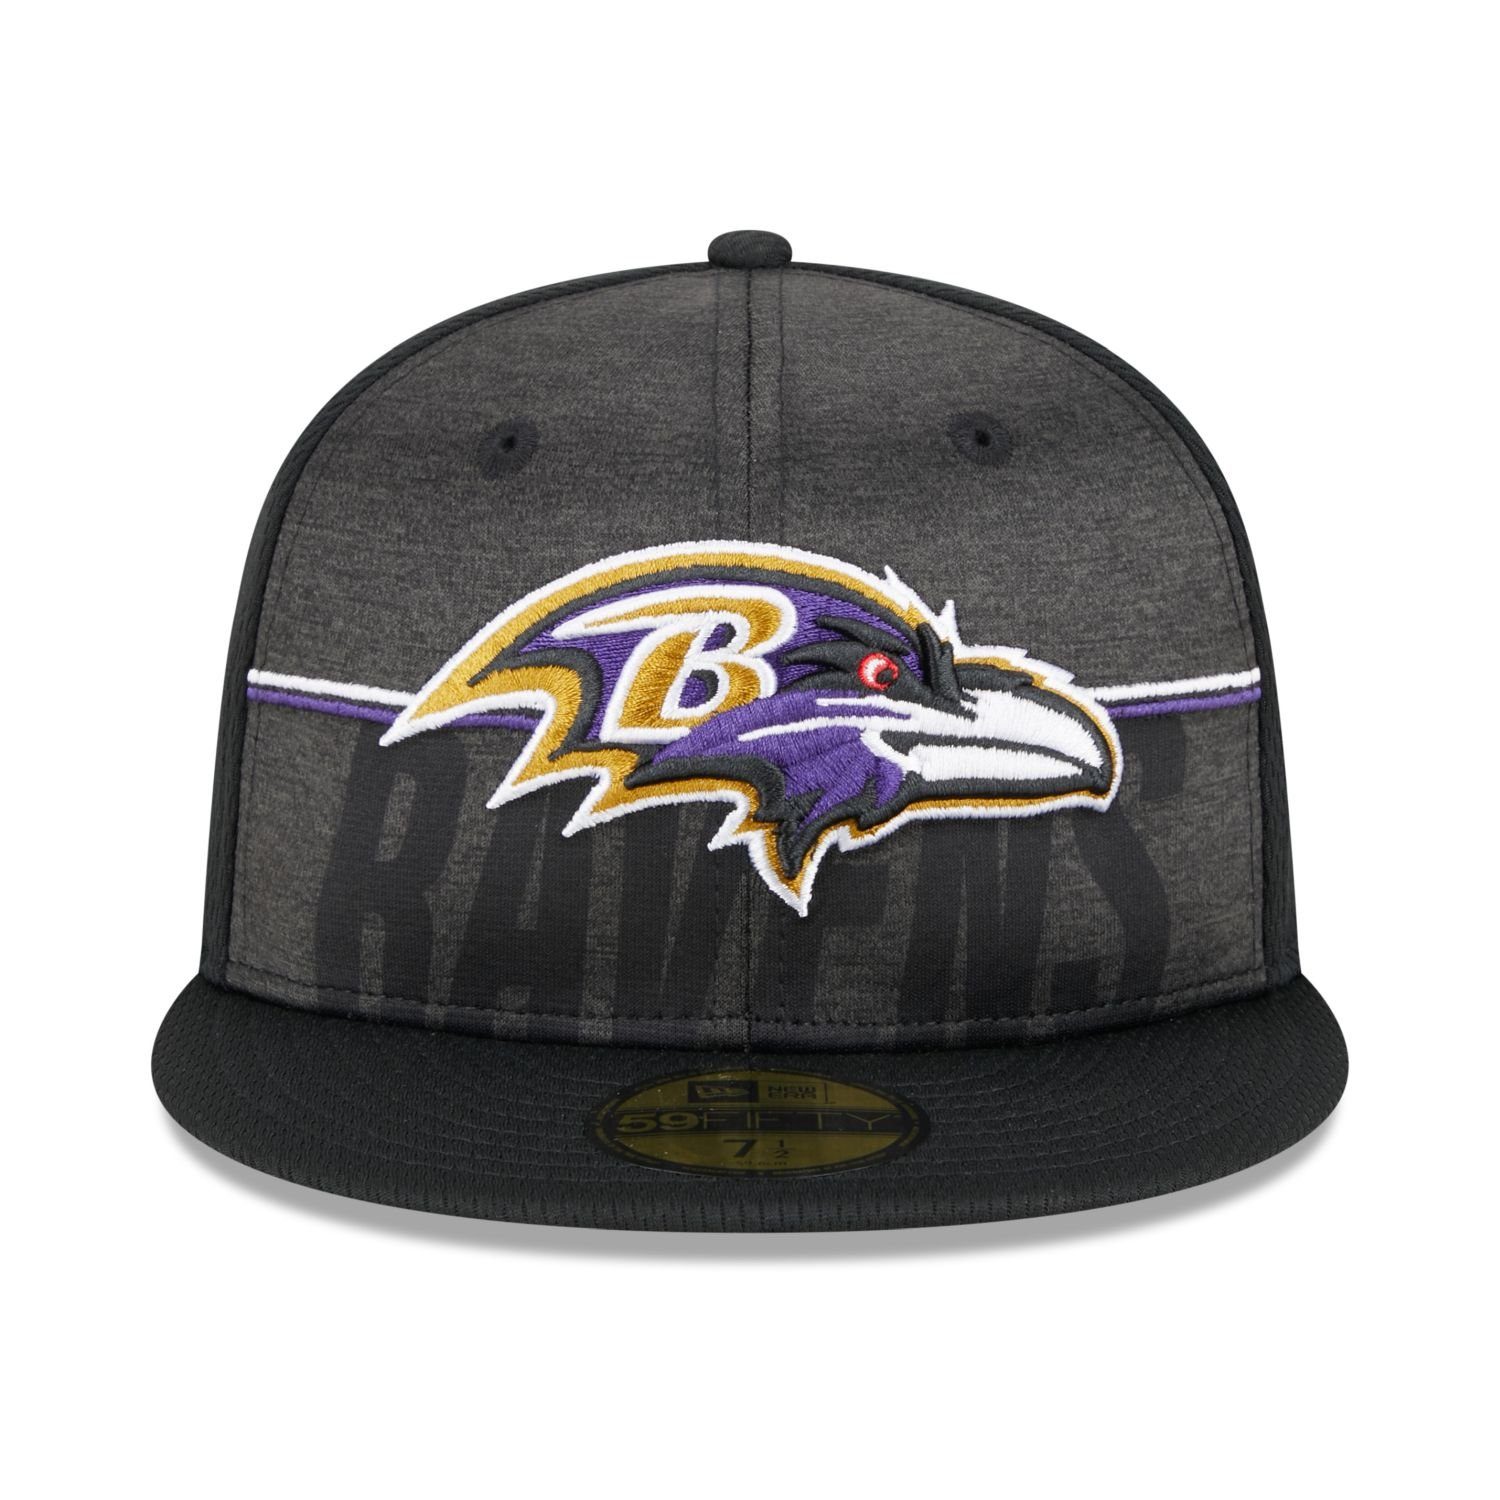 Cap Fitted TRAINING Ravens Baltimore 59Fifty Era NFL New